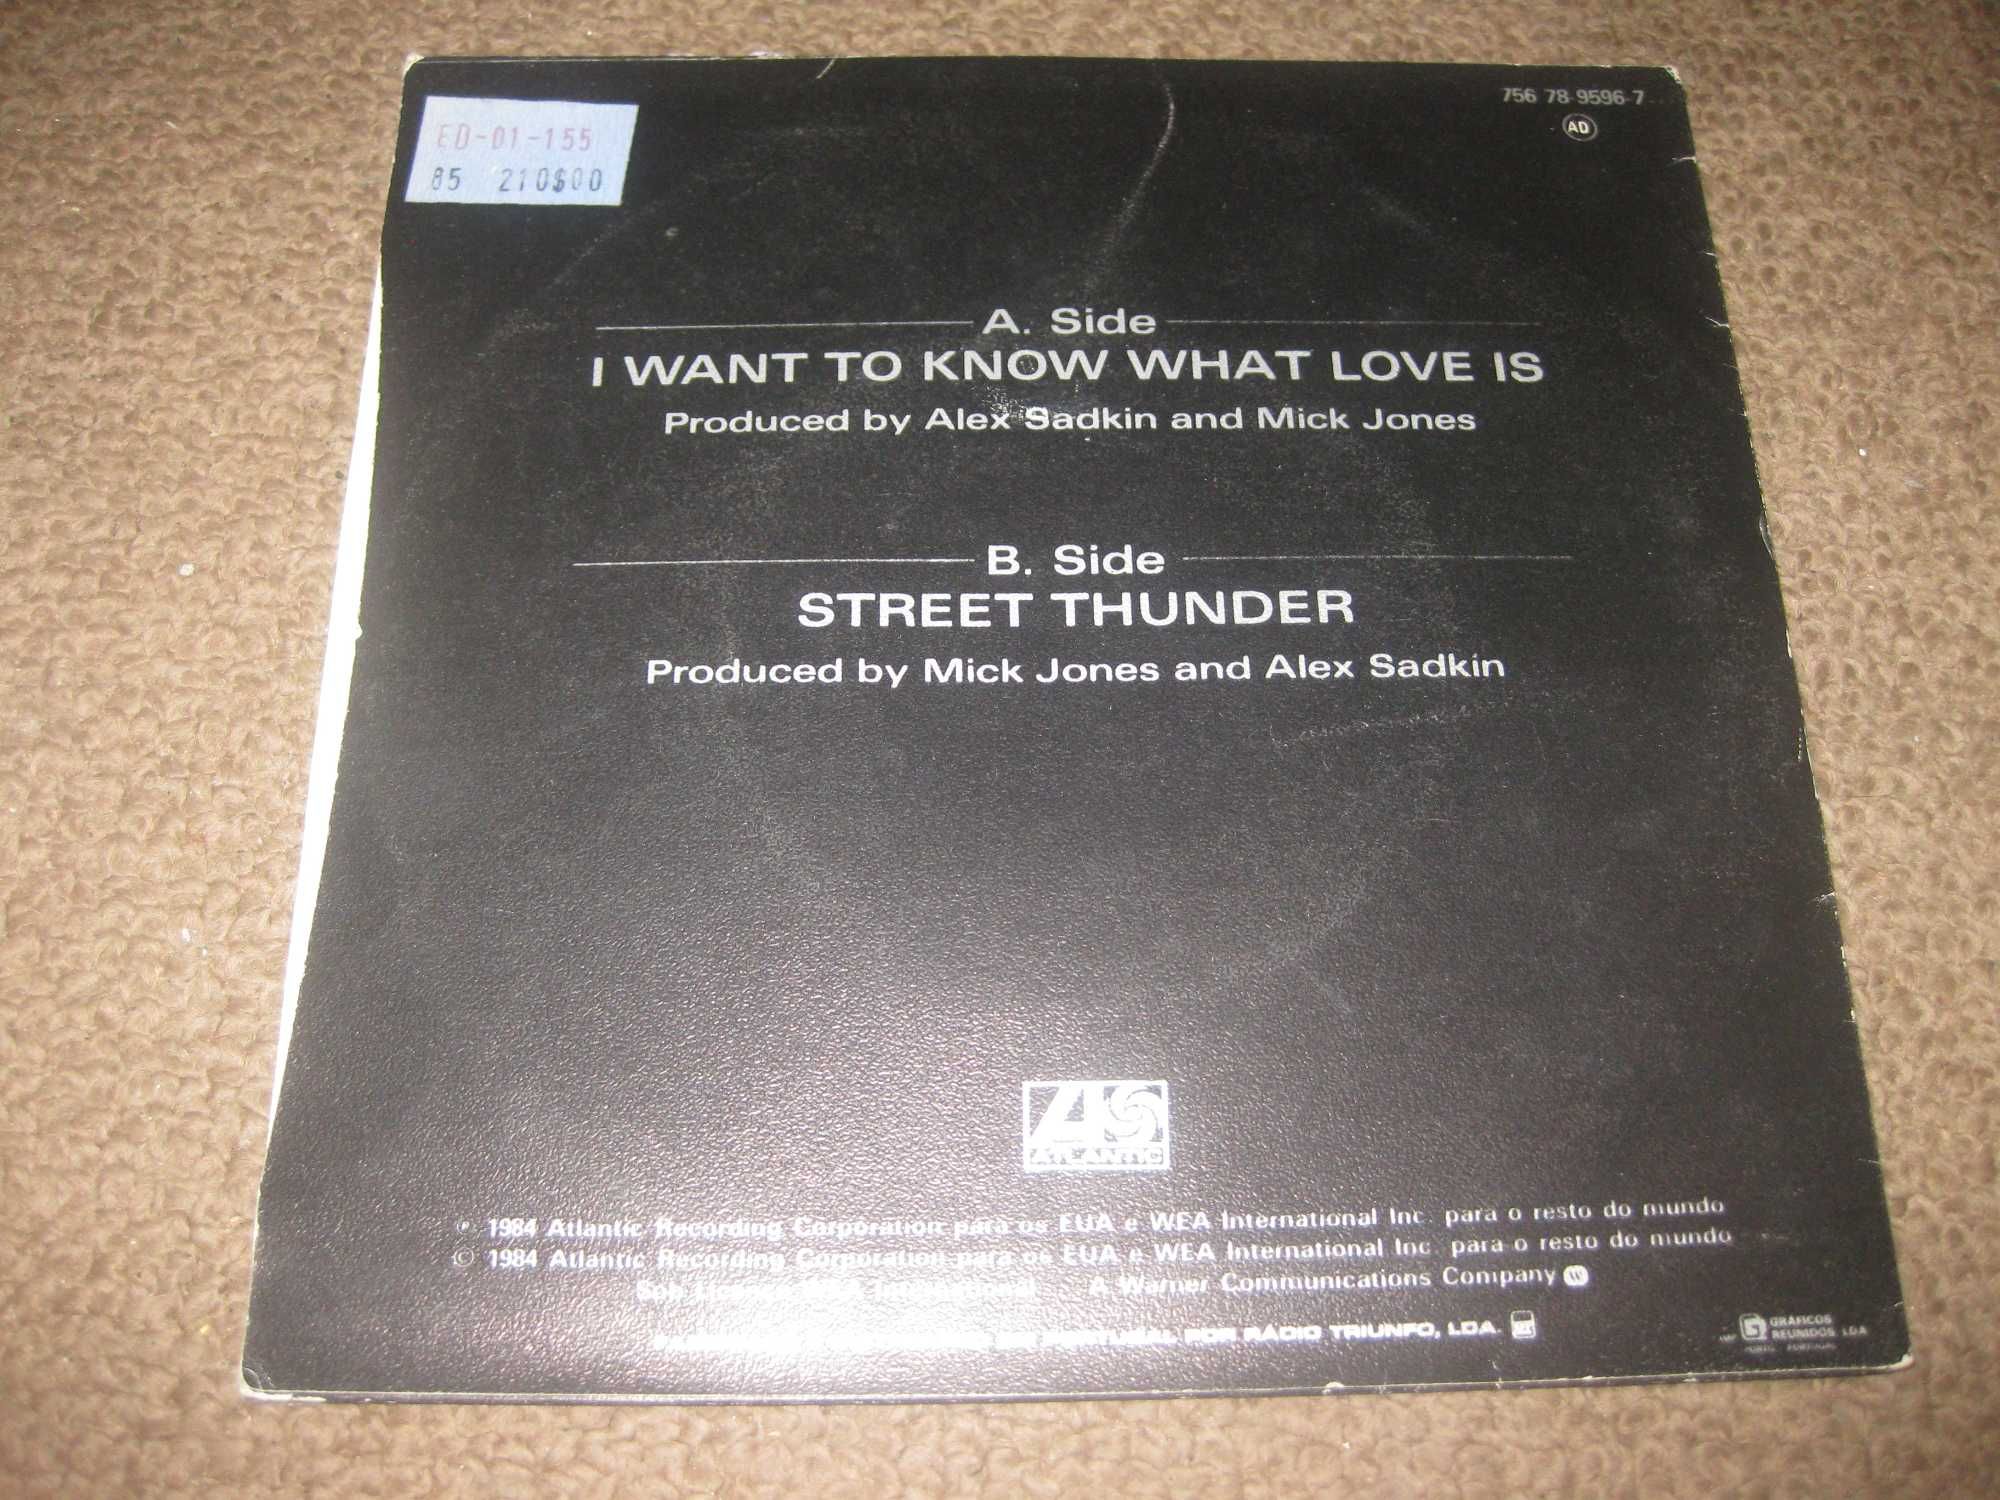 Vinil Single 45 rpm dos Foreigner "I Want To Know What Love Is"